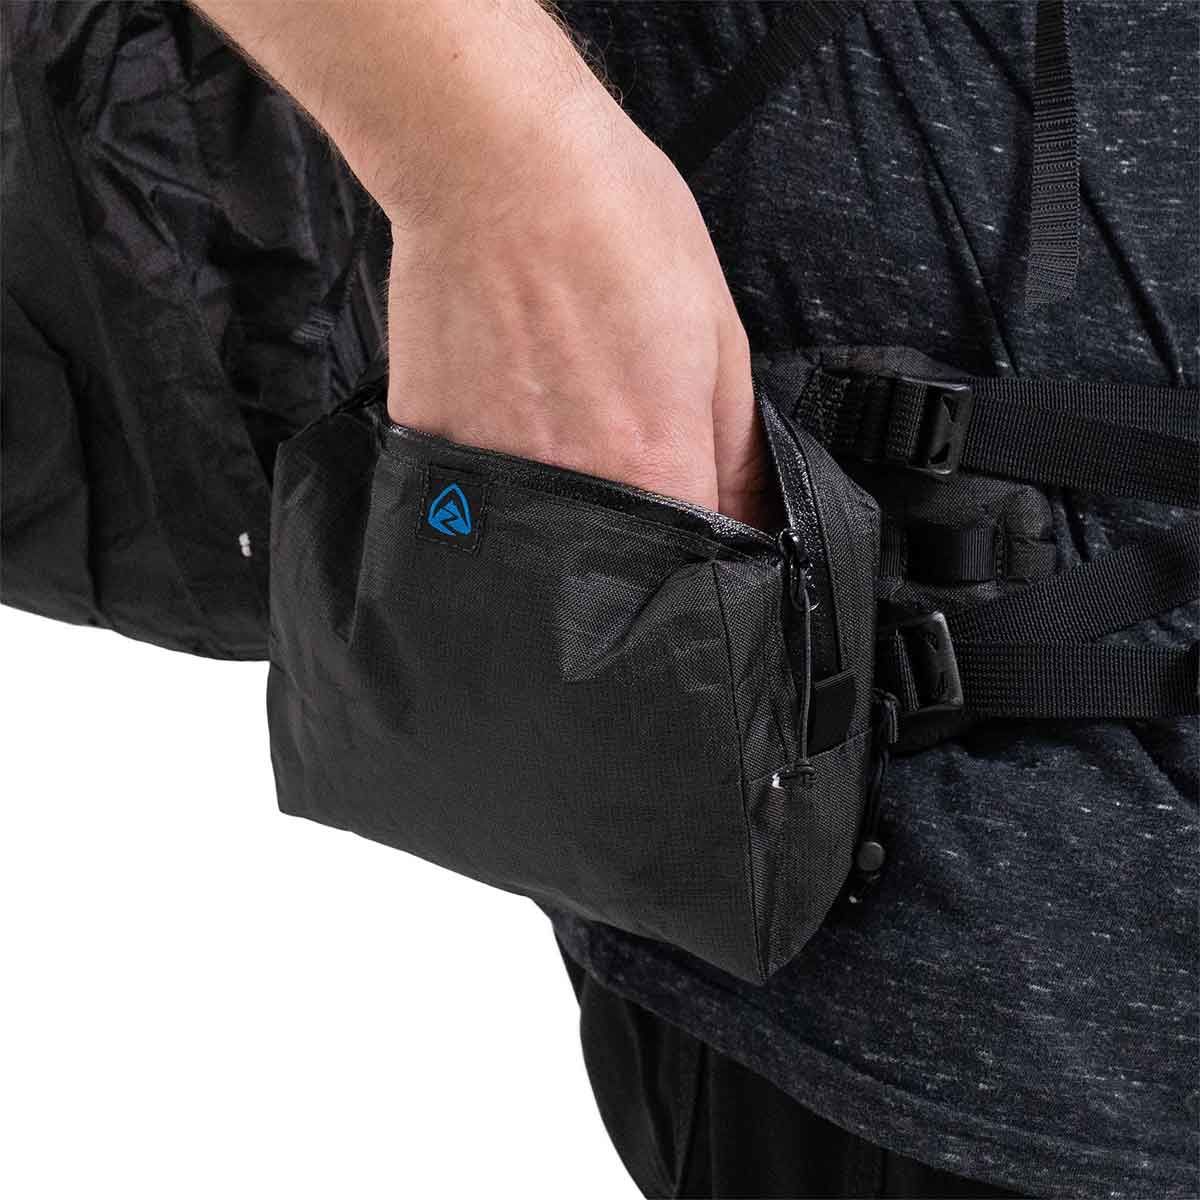 Backpack belt pouch